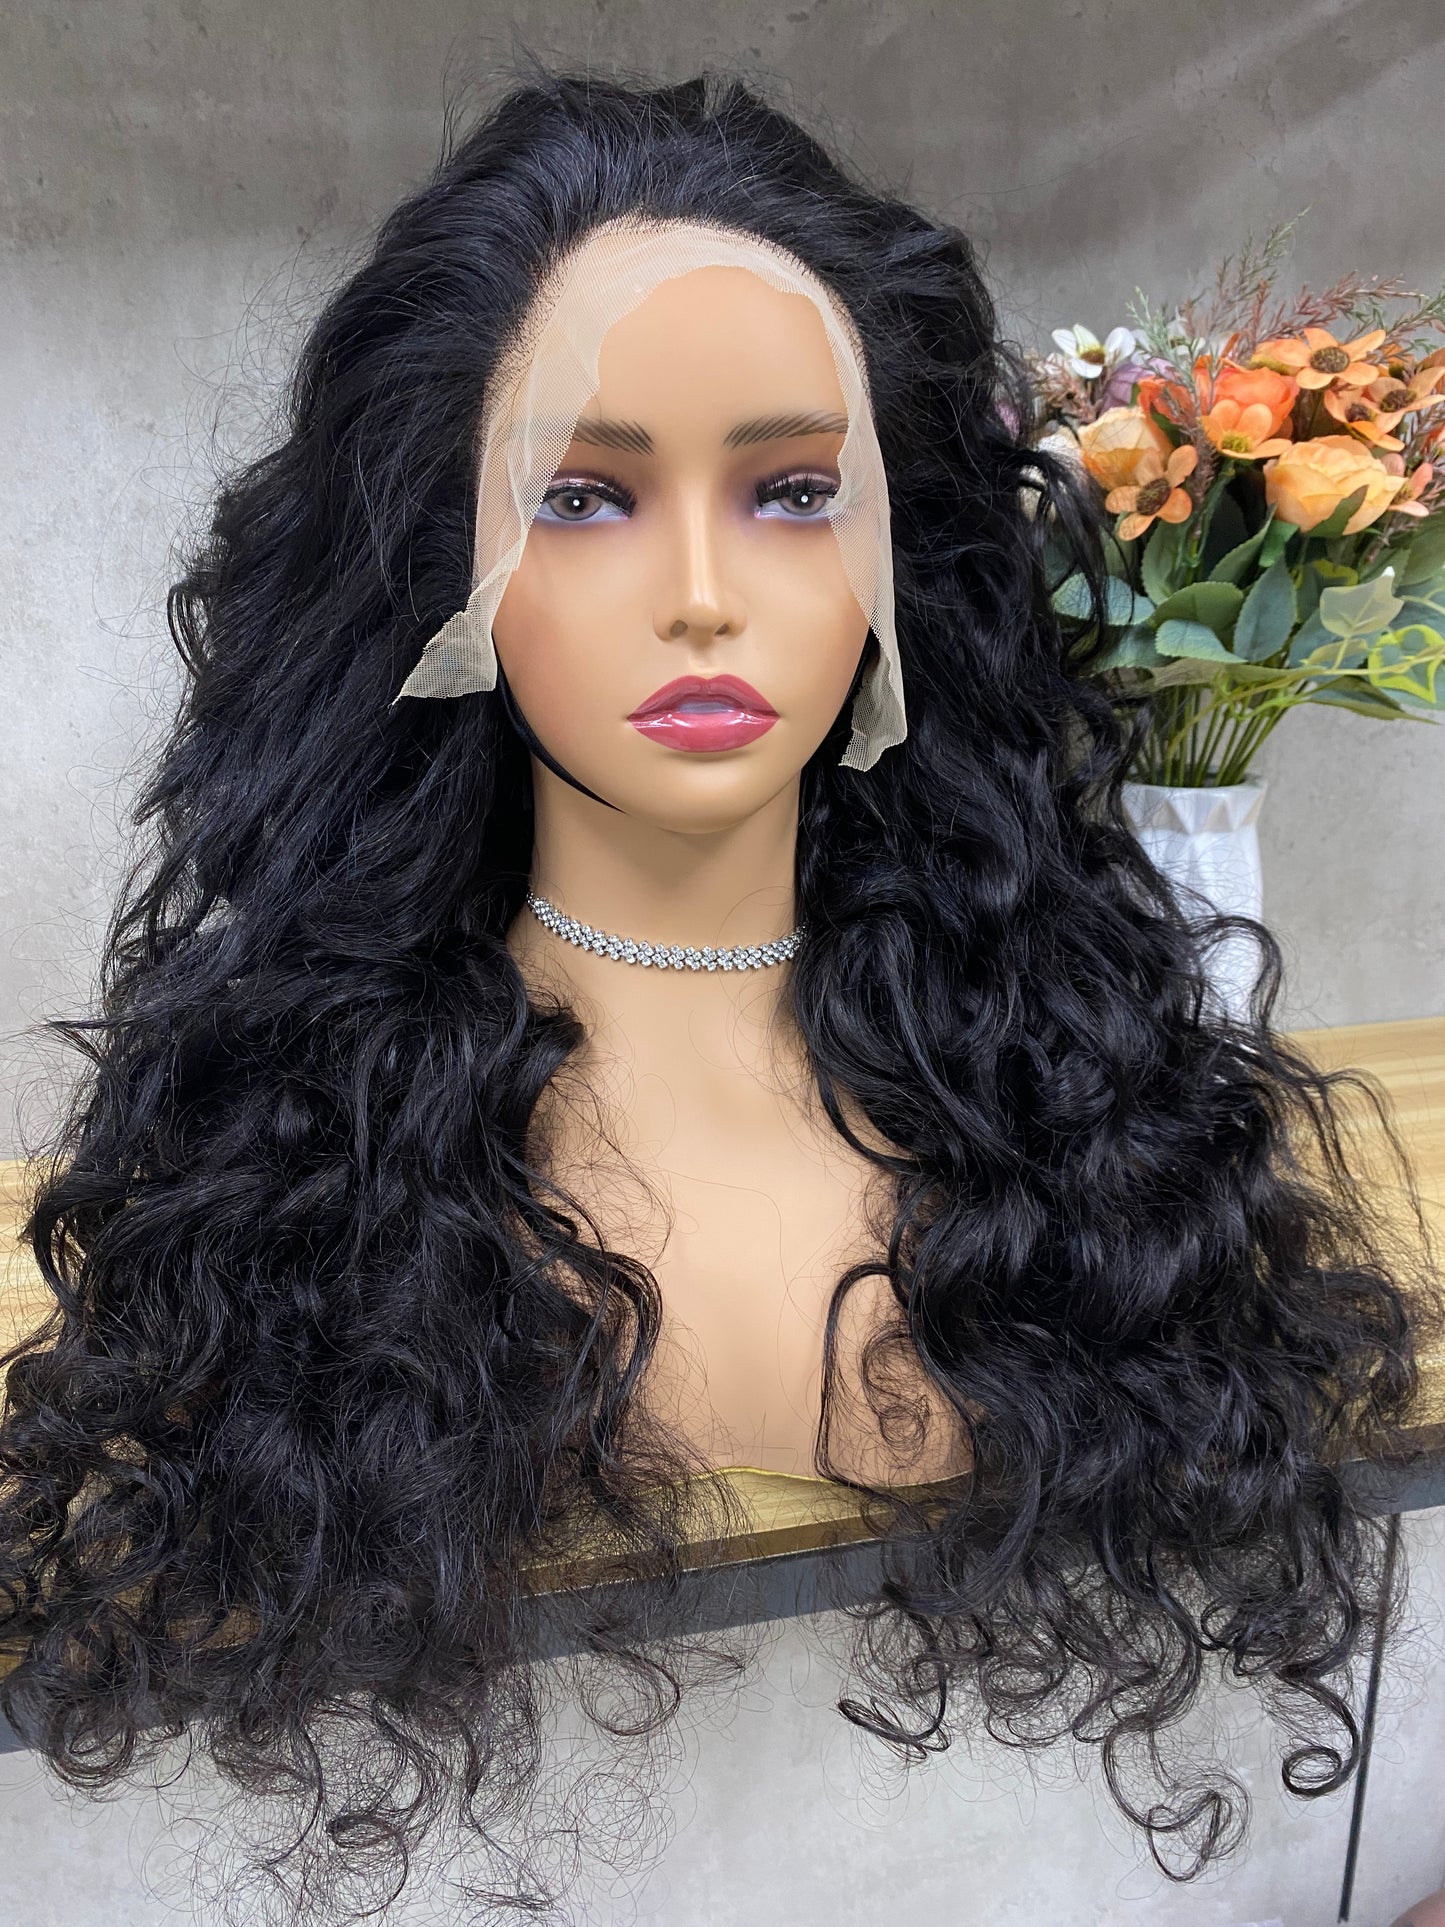 Nature 13x4 Lace Remy Human Hair Loose Wave Long Hair Wigs